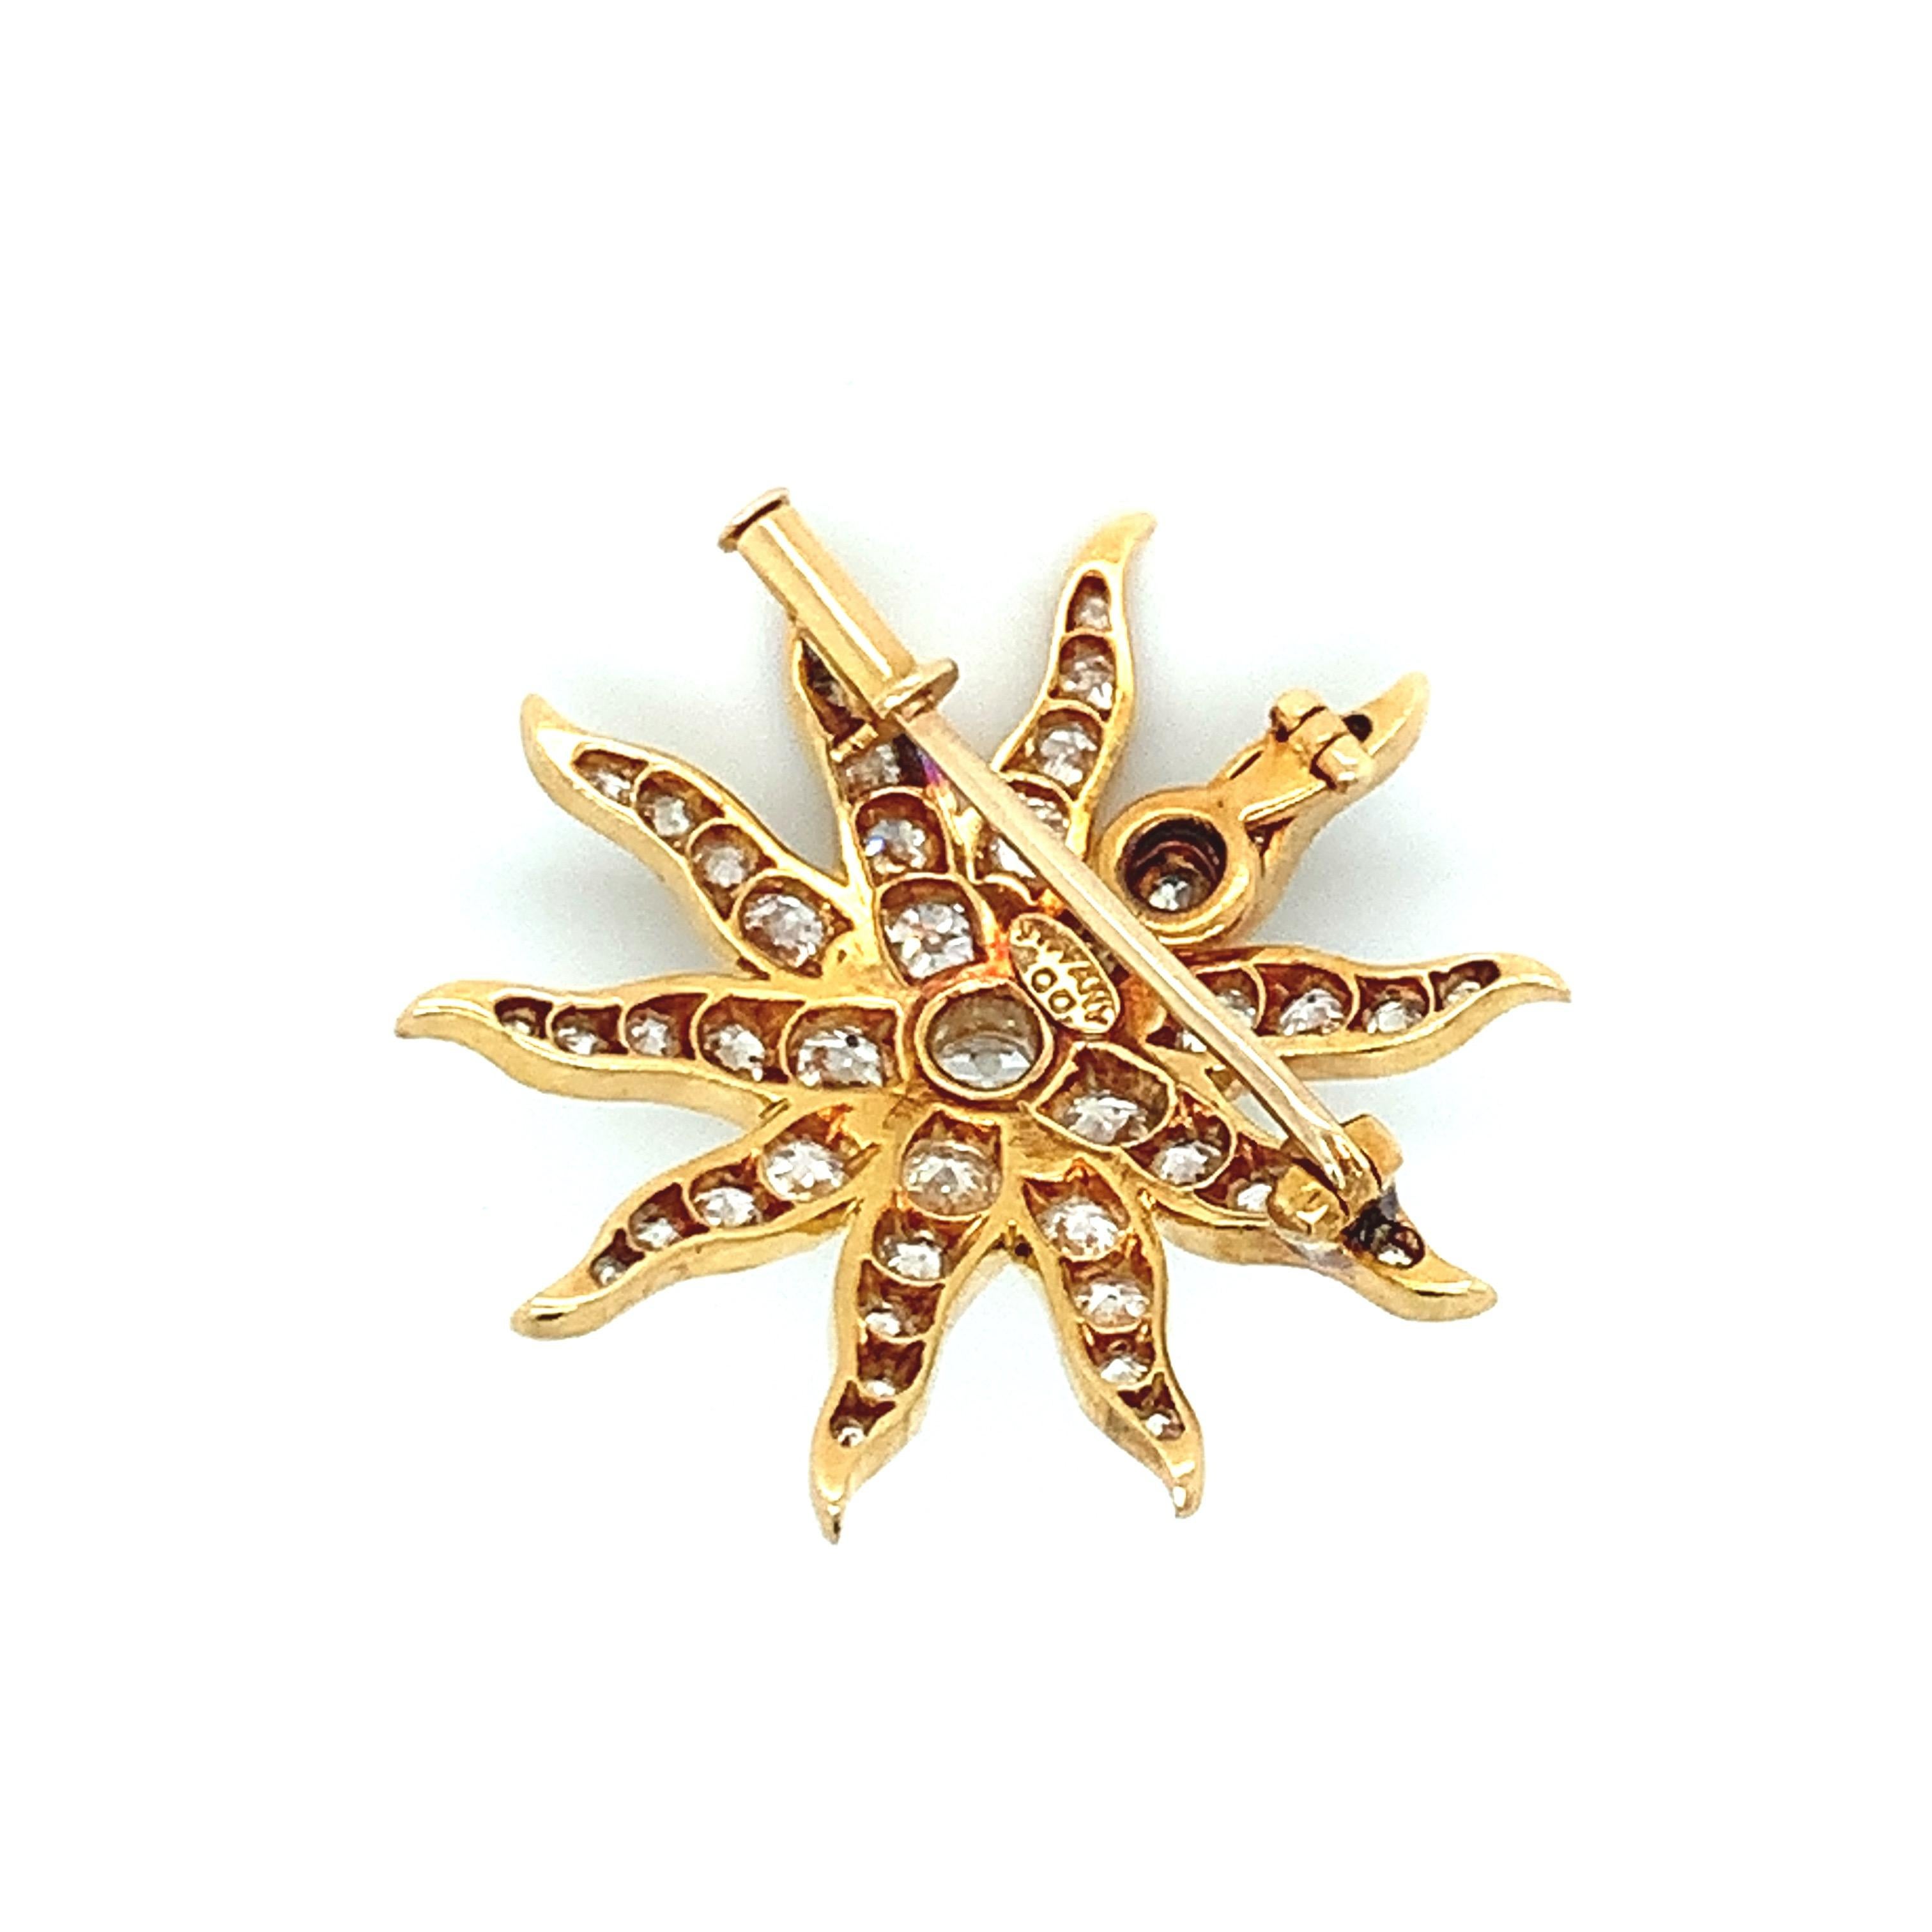 Tiffany & Co. 18 karat yellow gold brooch with a sun motif. It can also be turned into a pendant. Marked: Tiffany & Co. Total weight: 5.4 grams. Width: 2.6 cm. Length: 2.7 cm. 